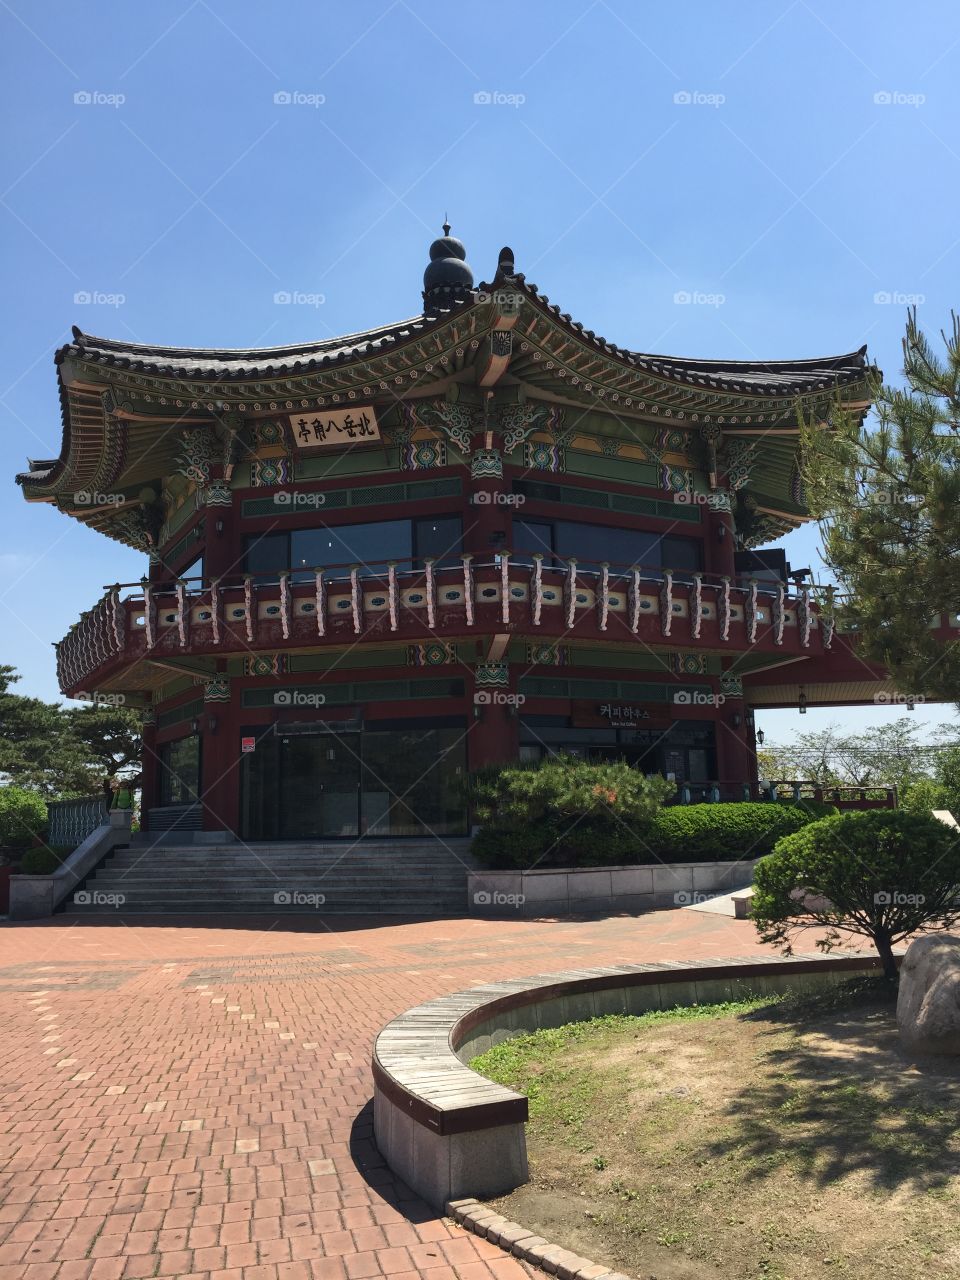 One of many temples